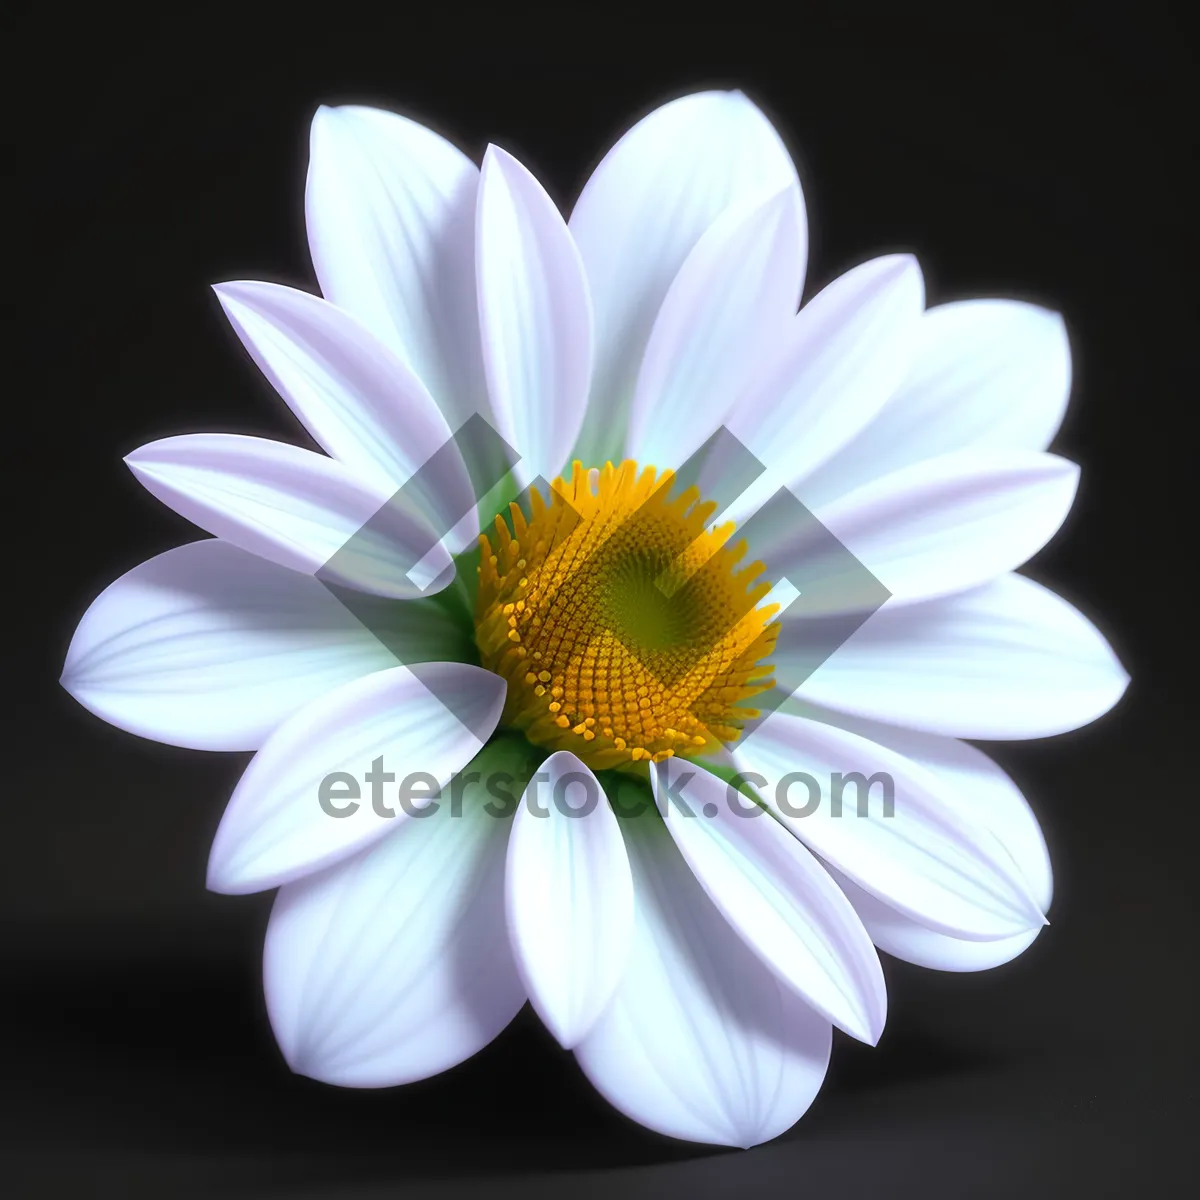 Picture of Yellow Daisy Blossom in Full Bloom